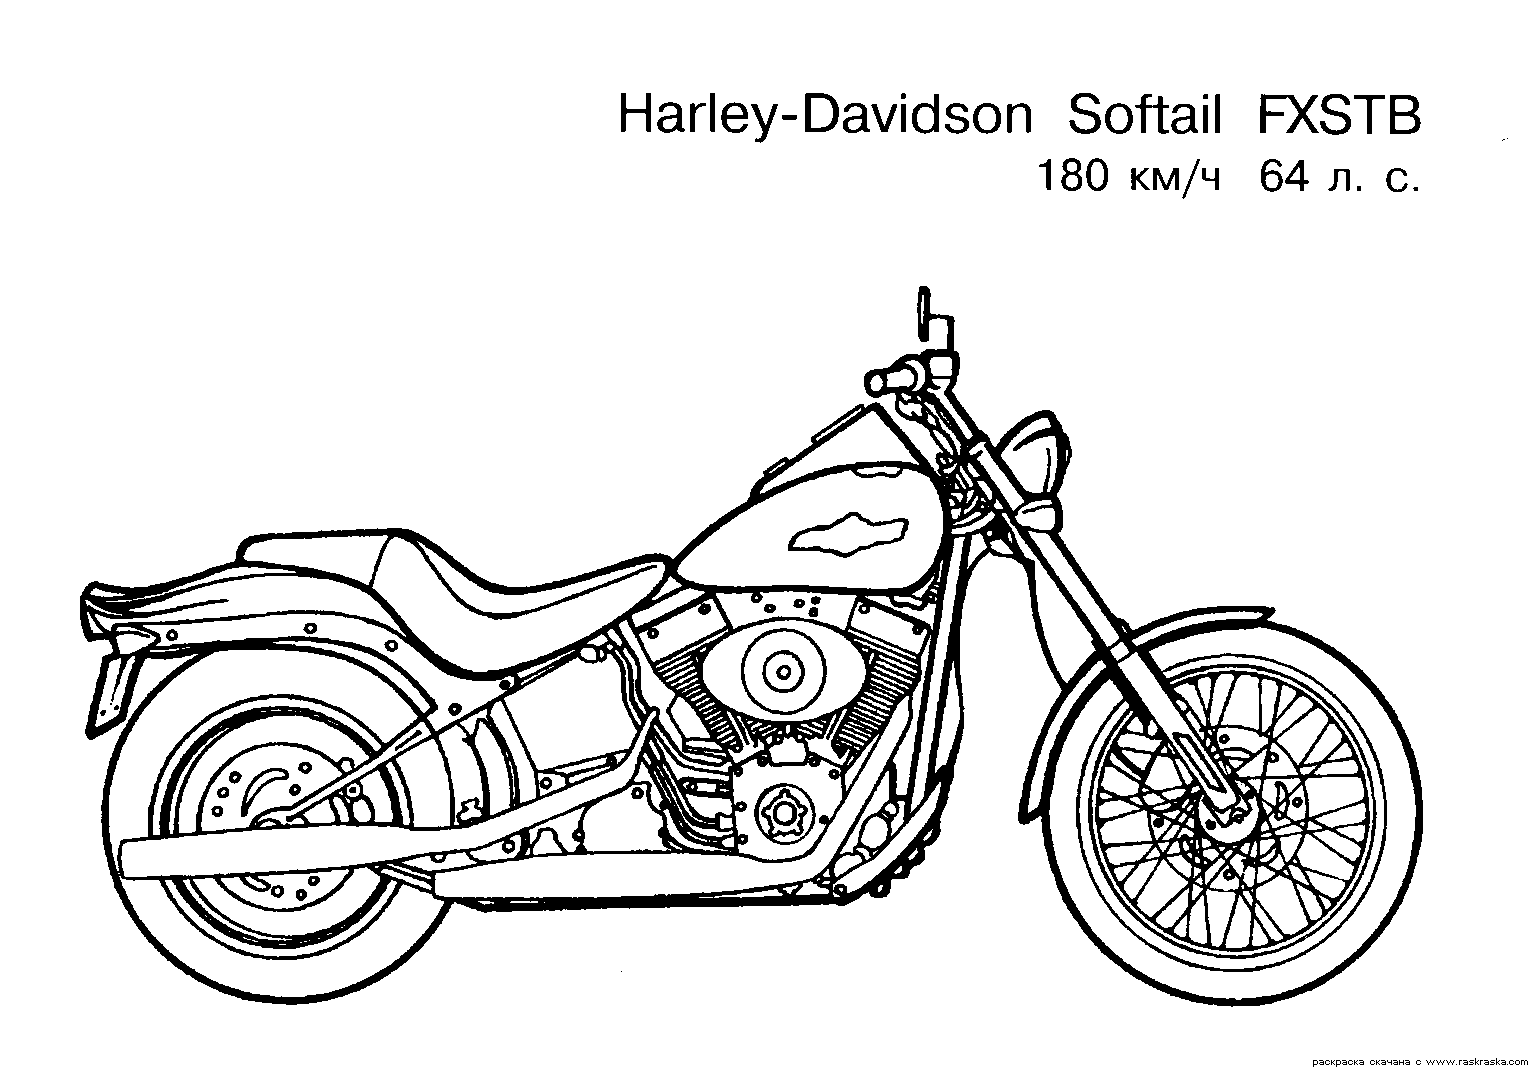 Free Motorcycle coloring page, letscoloringpages.com, Harley-Davidson Softail